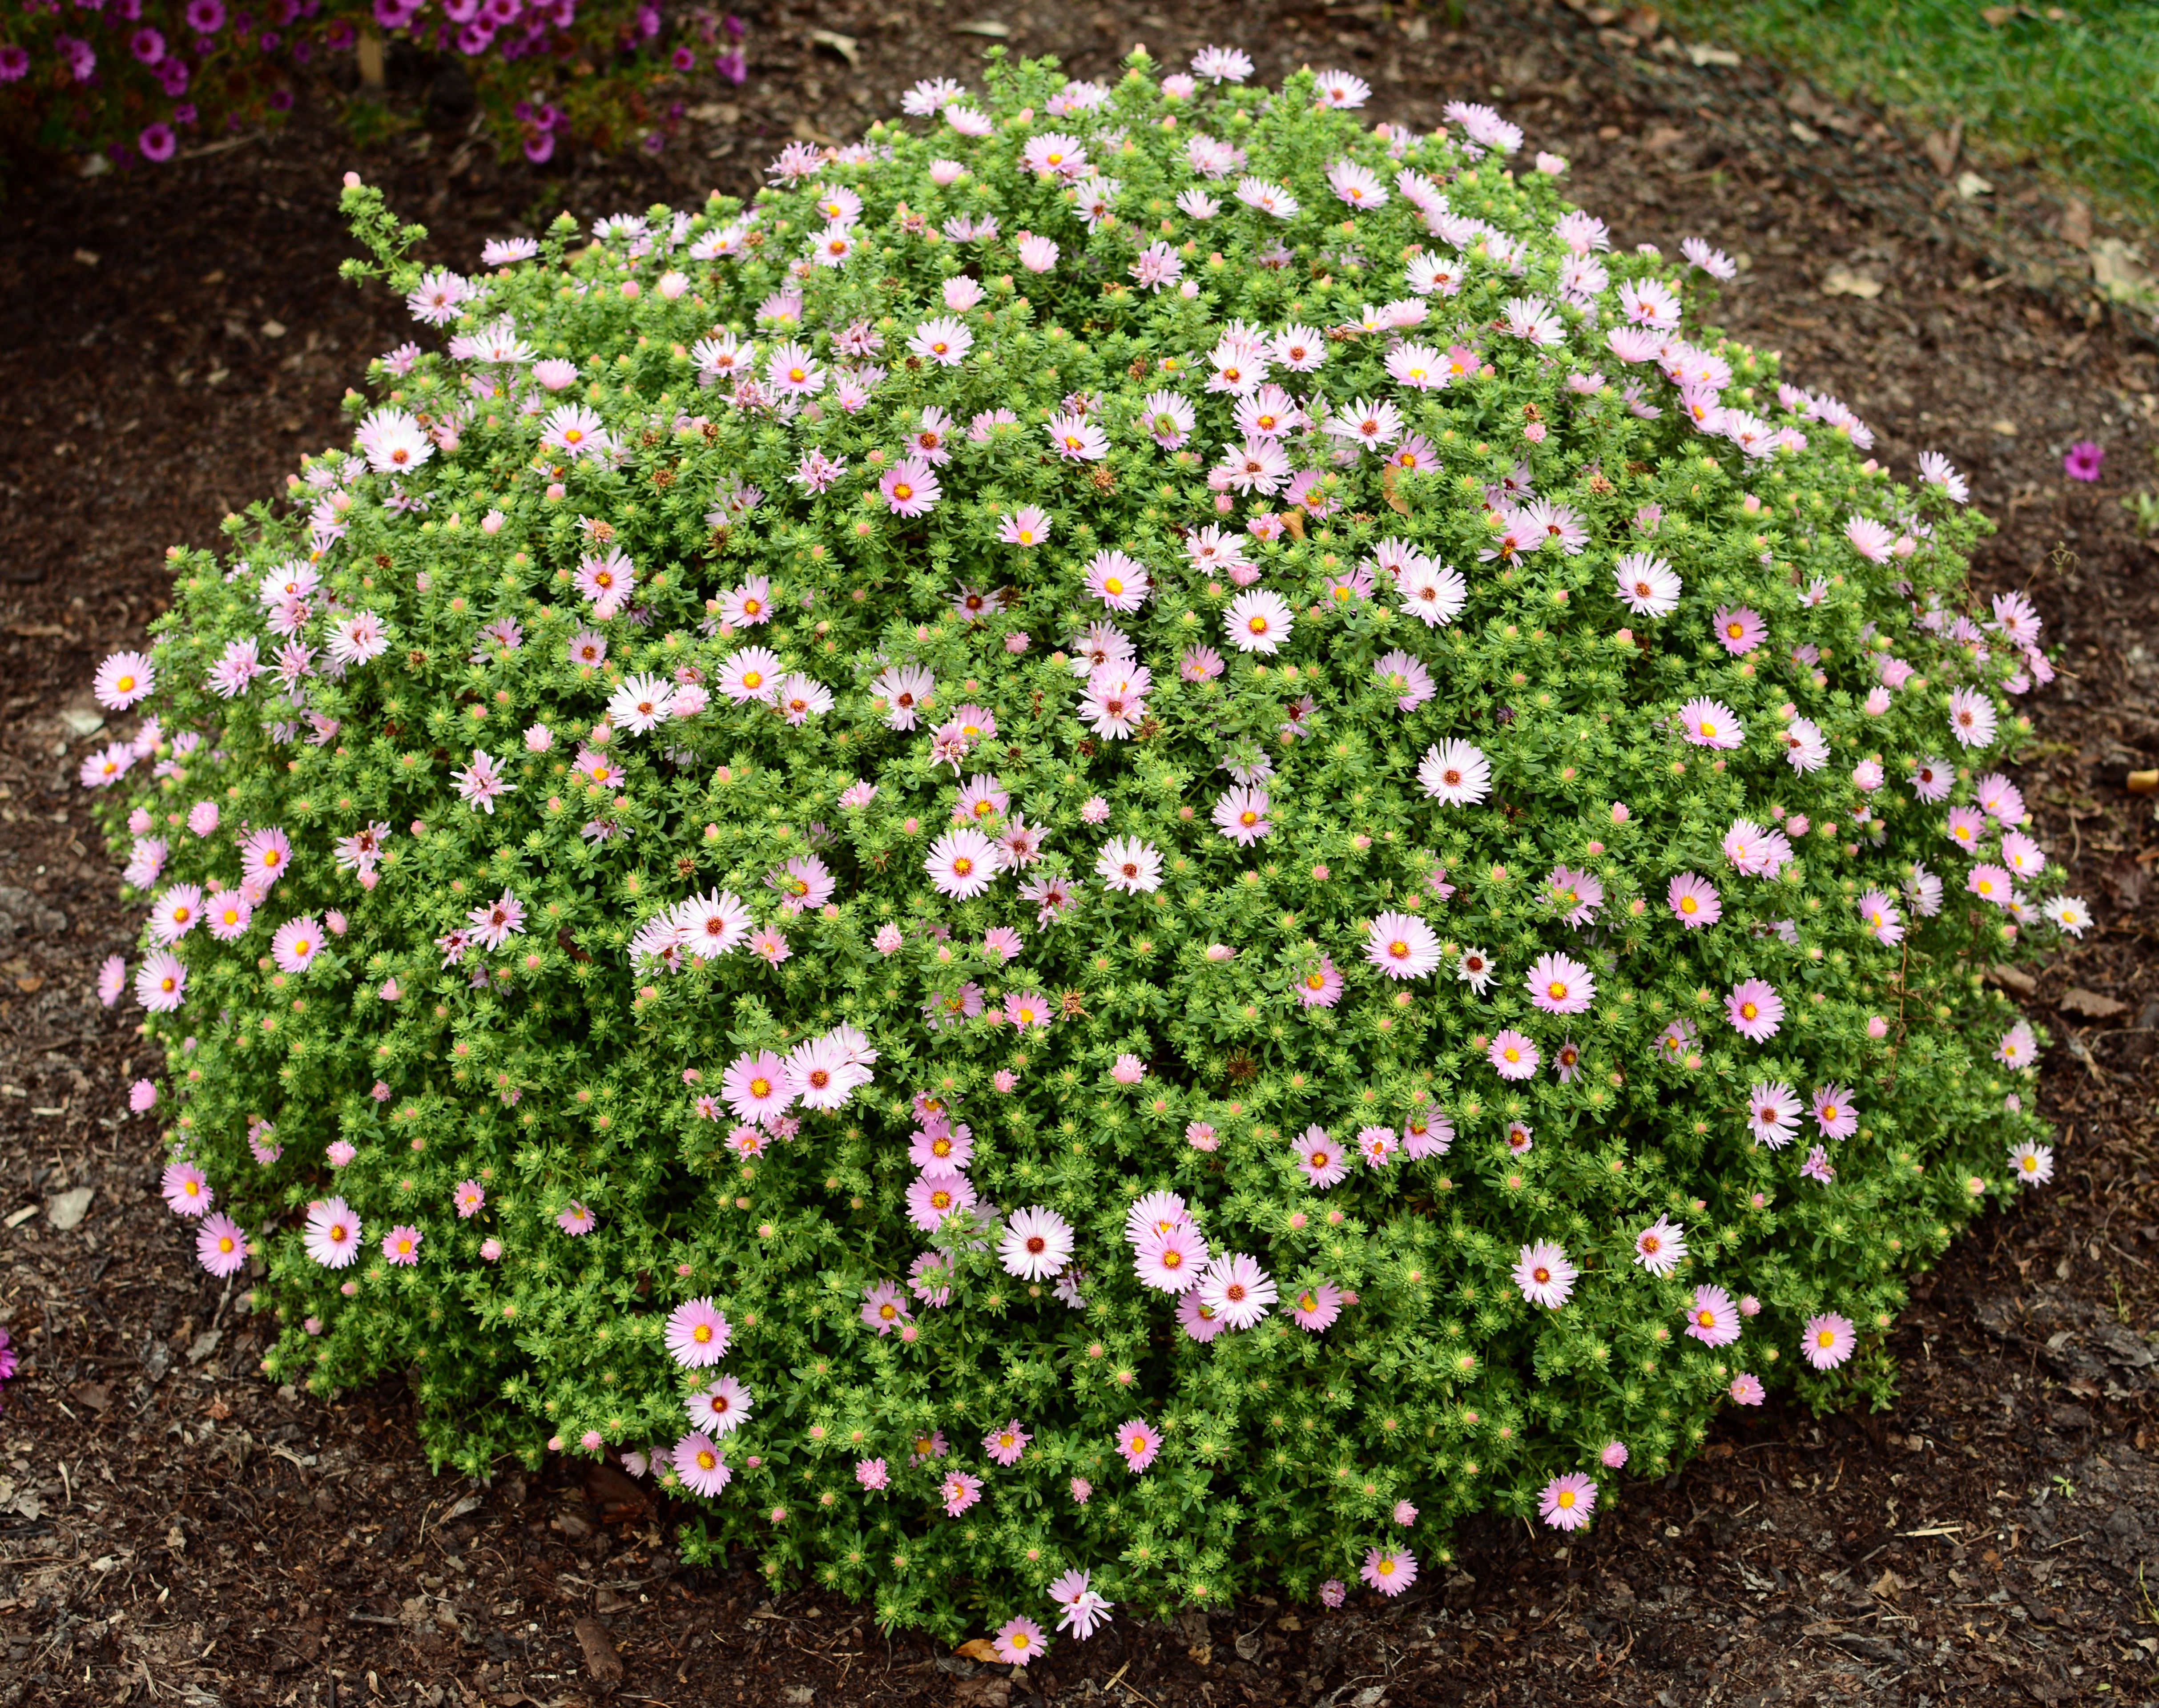 images/plants/aster/ast-billowing-pink/ast-billowing-pink-0004.jpg